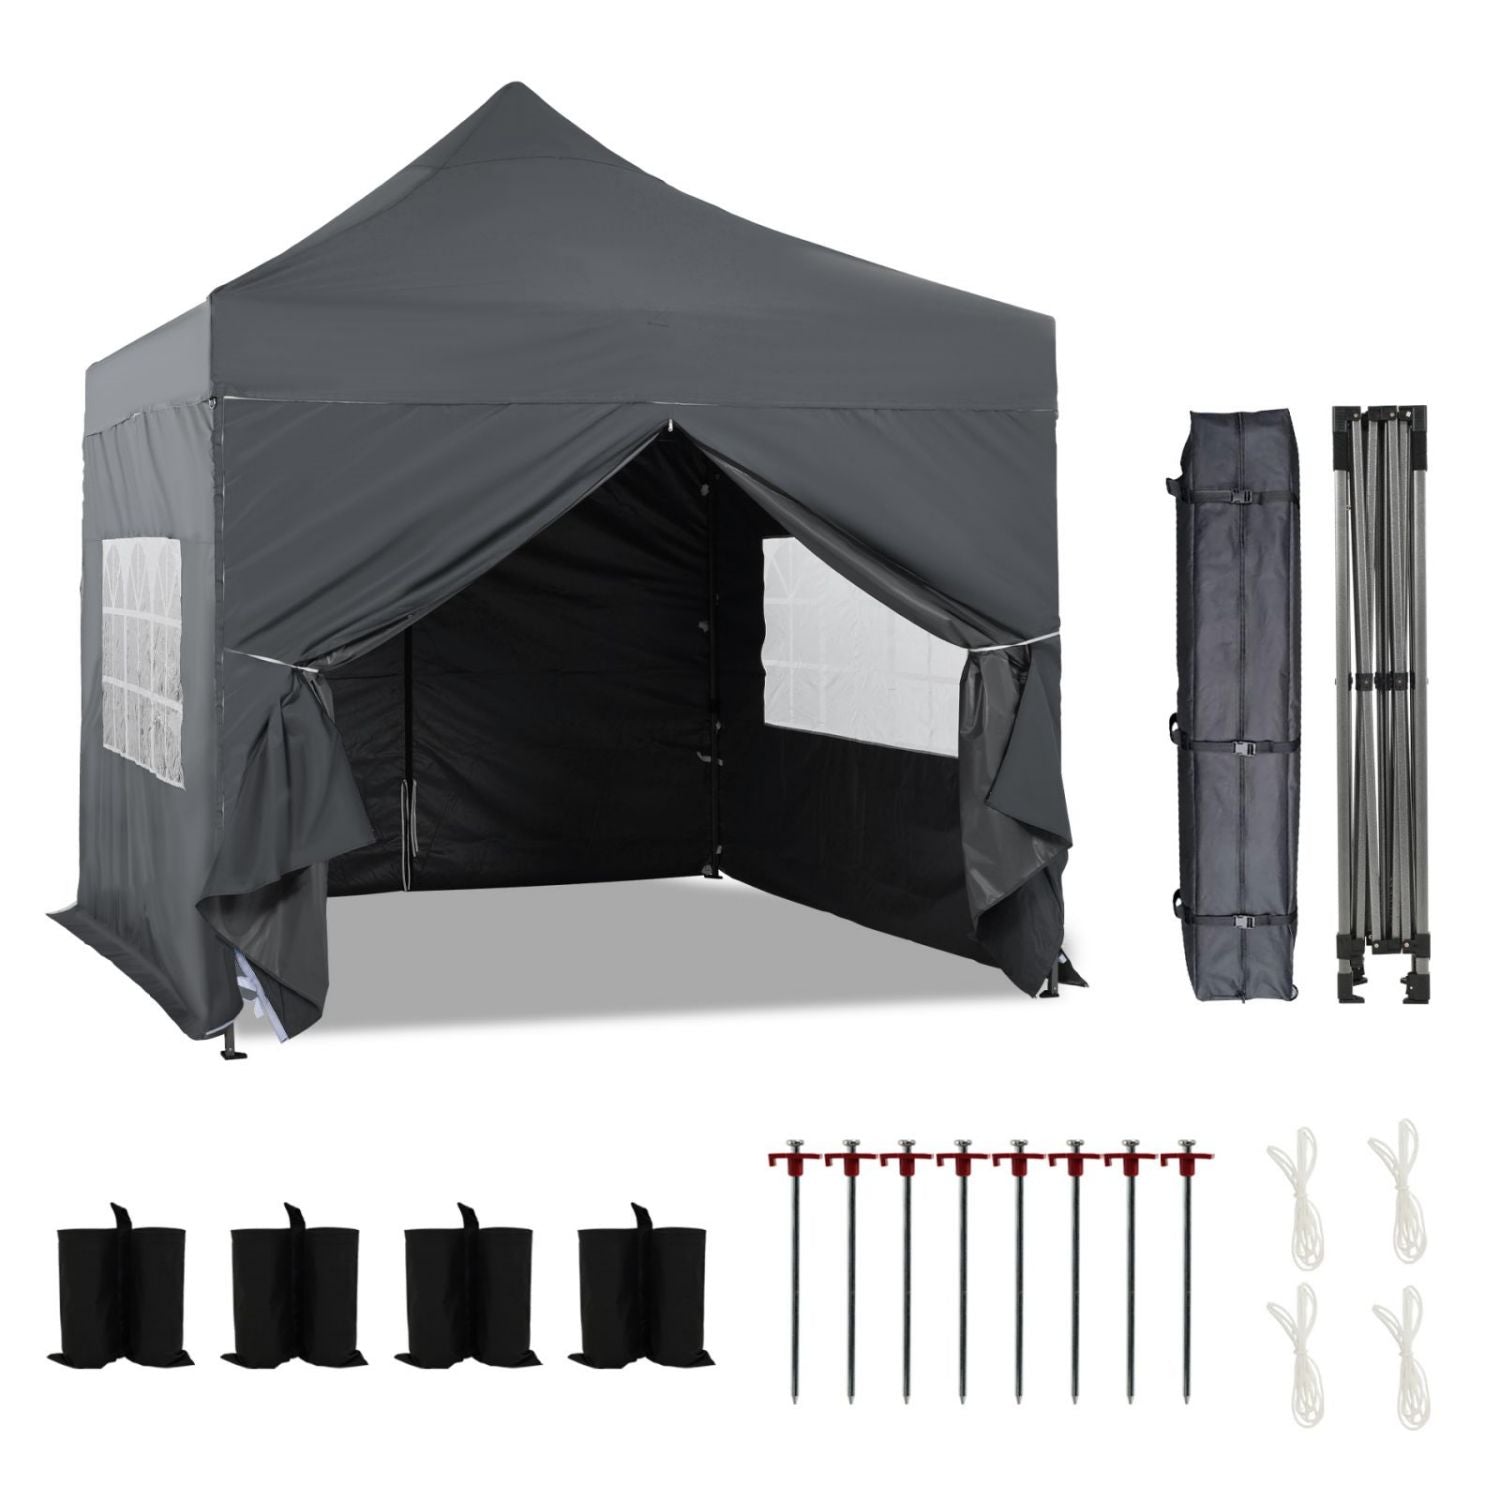 10 x 10 FT. Pop Up Canopy Tent with Windows Sidewalls, 3 Adjustable Heights, with Wheeled Bag  Aoodor  Gray  